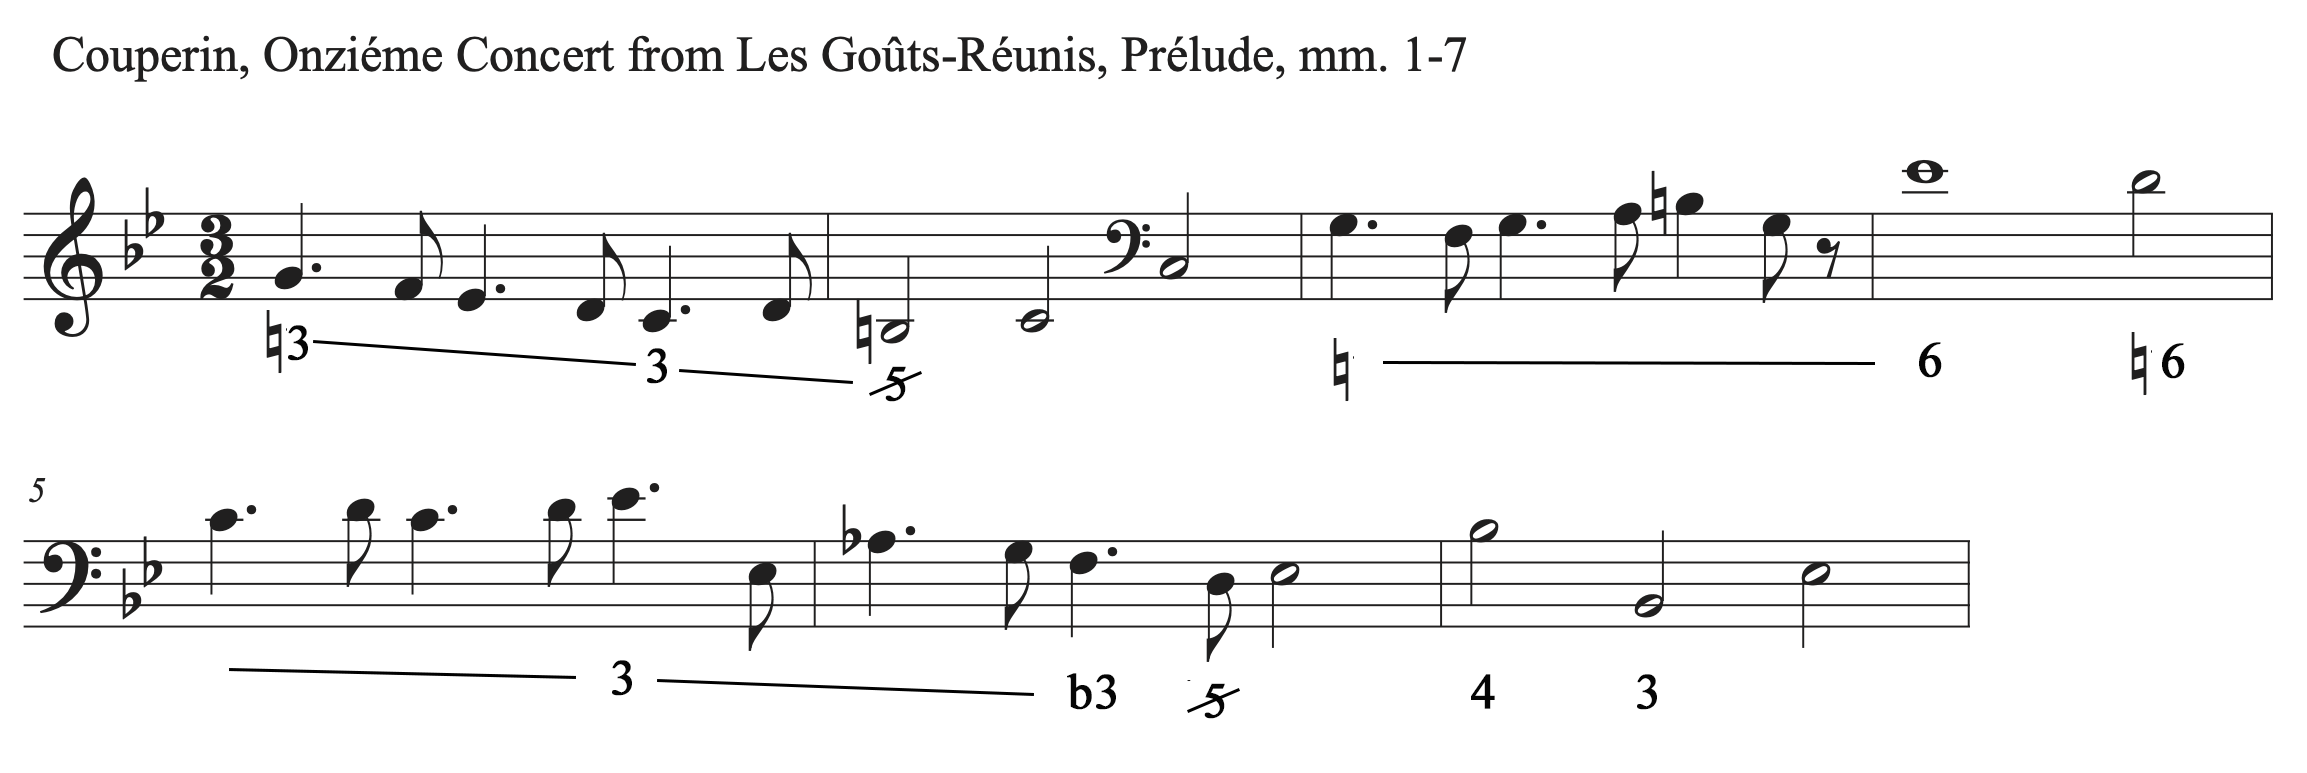 Excerpt from Couperin's Onzieme Concert from Les Gouts-Reunis, Prelude, measures 1 to 7 with figured bass symbols shown.